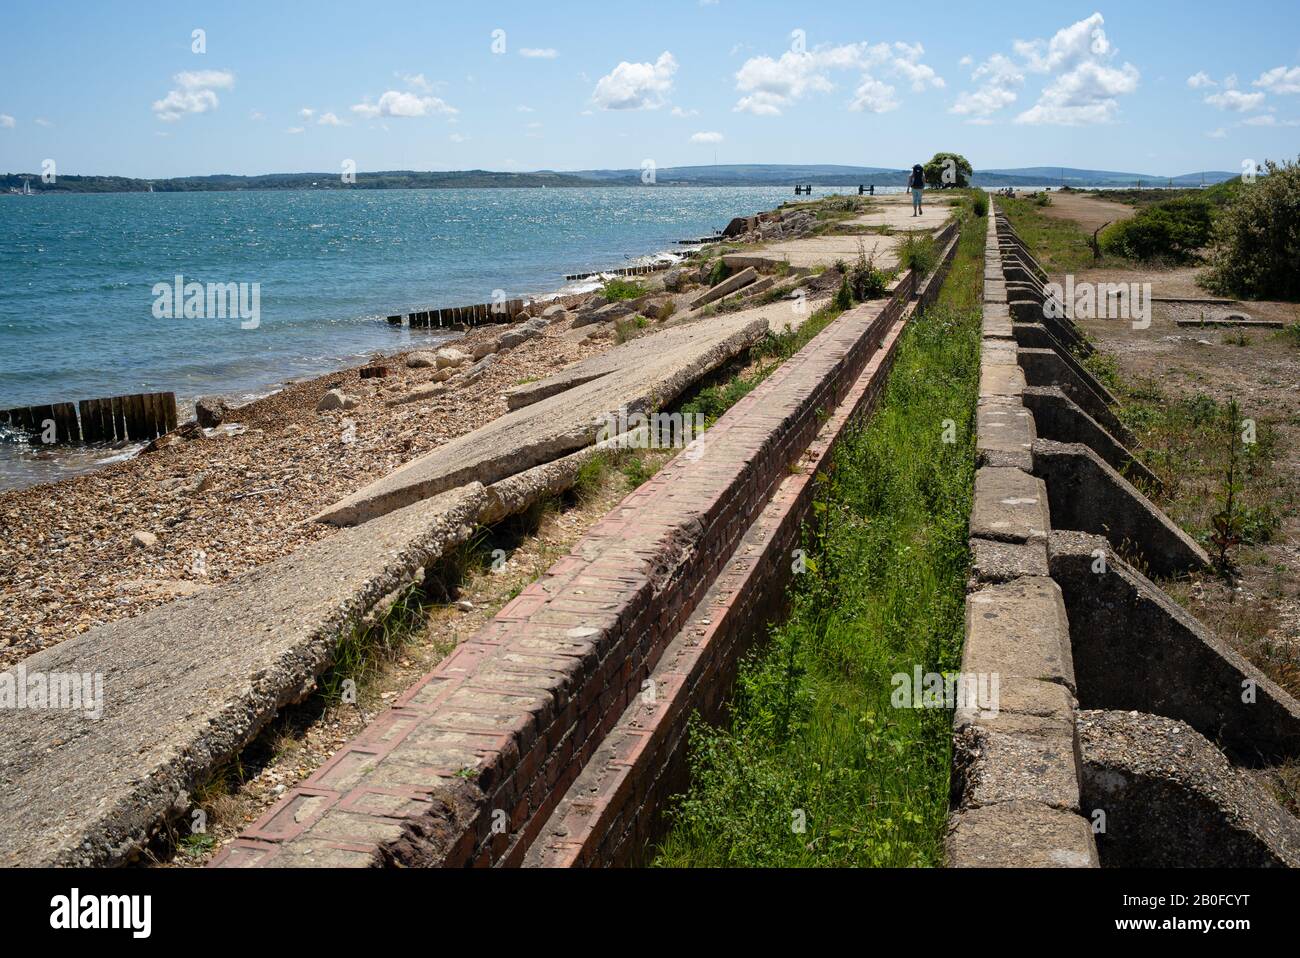 The site of construction of Mulberry harbours at Lepe beach Hampshire England.The site was used to construct caissons and to embark soldiers for D-Day Stock Photo